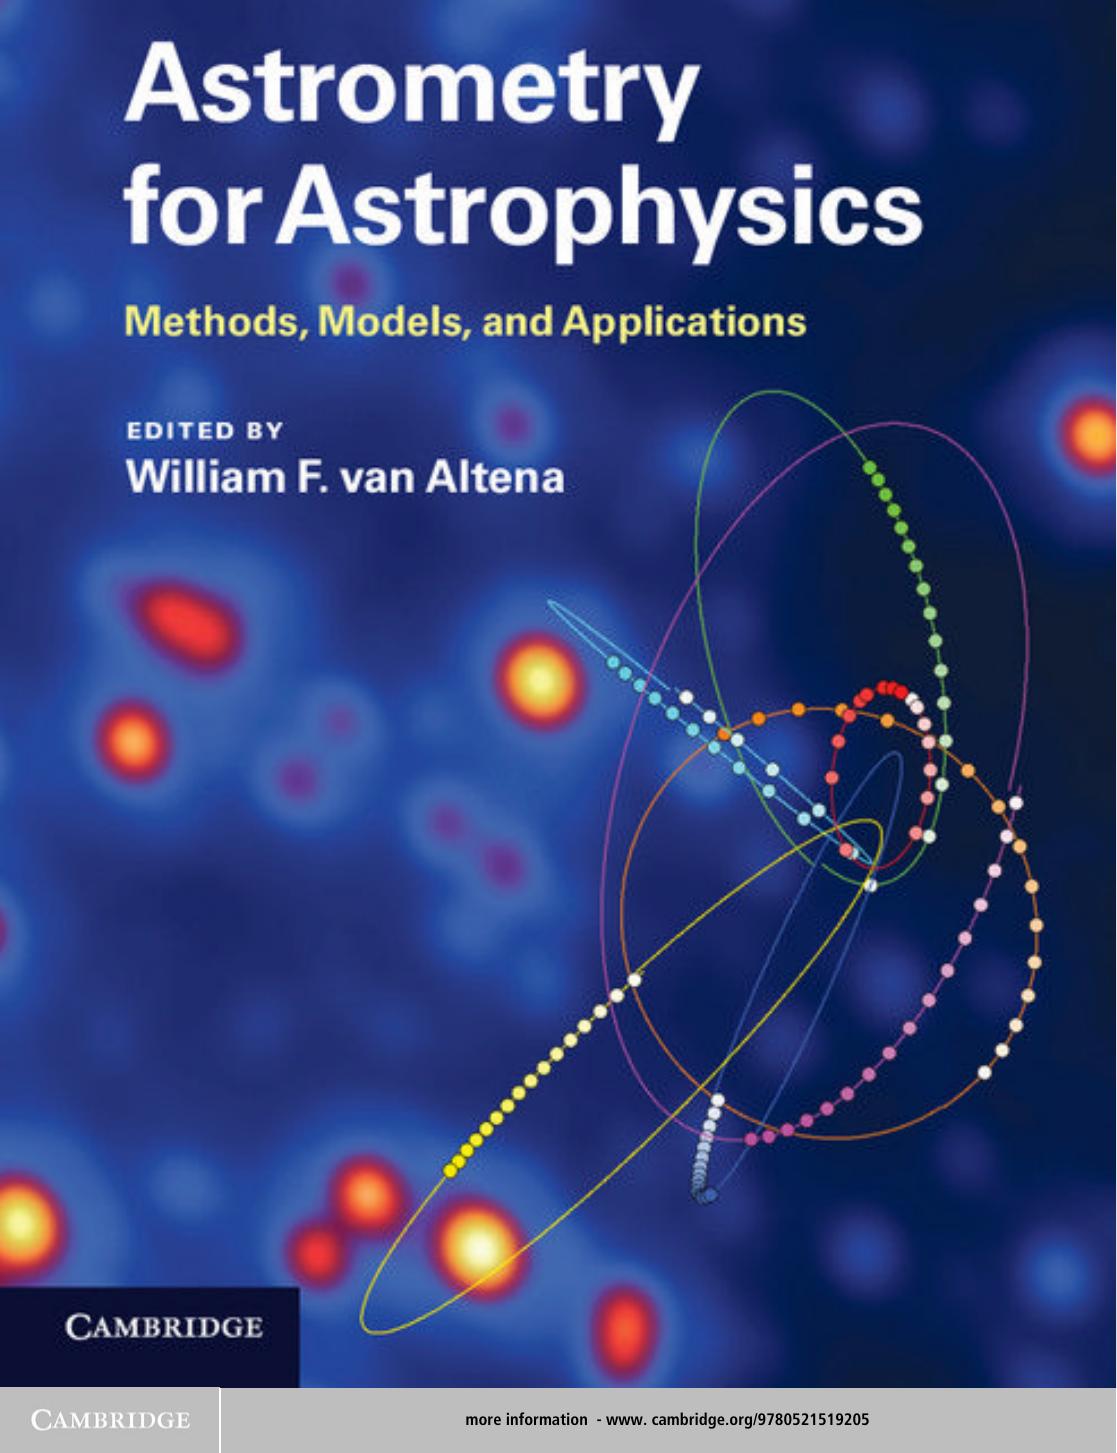 Astrometry for Astrophysics: Methods, Models, and Applications by William F. van Altena